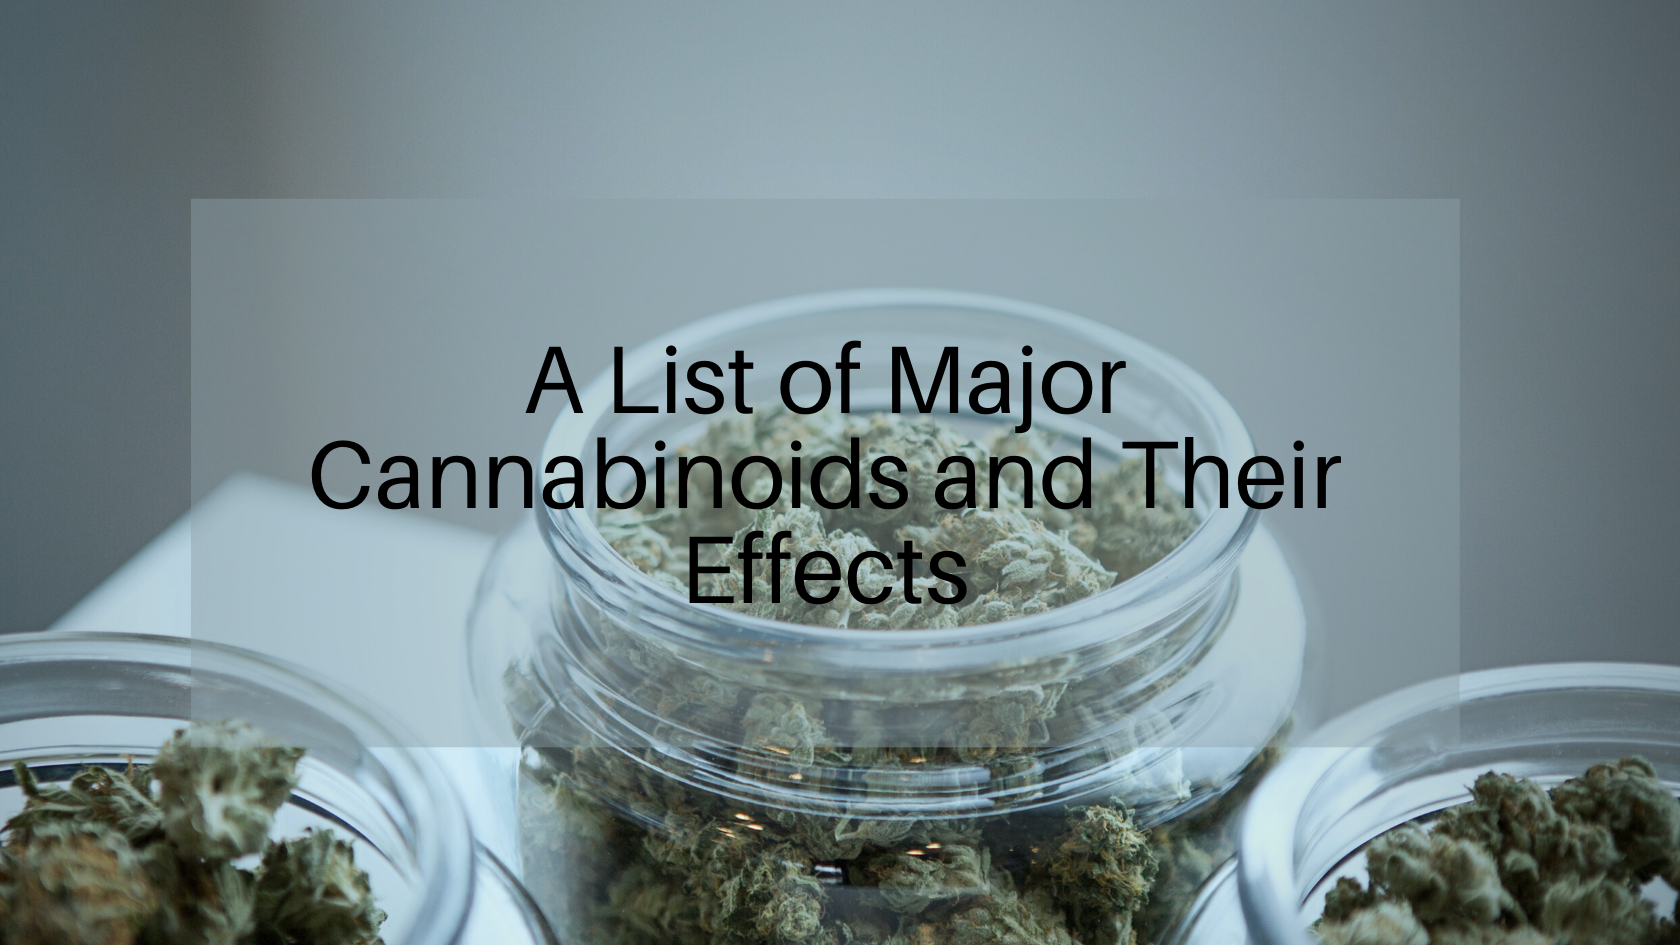 A List of Major Cannabinoids and Their Effects